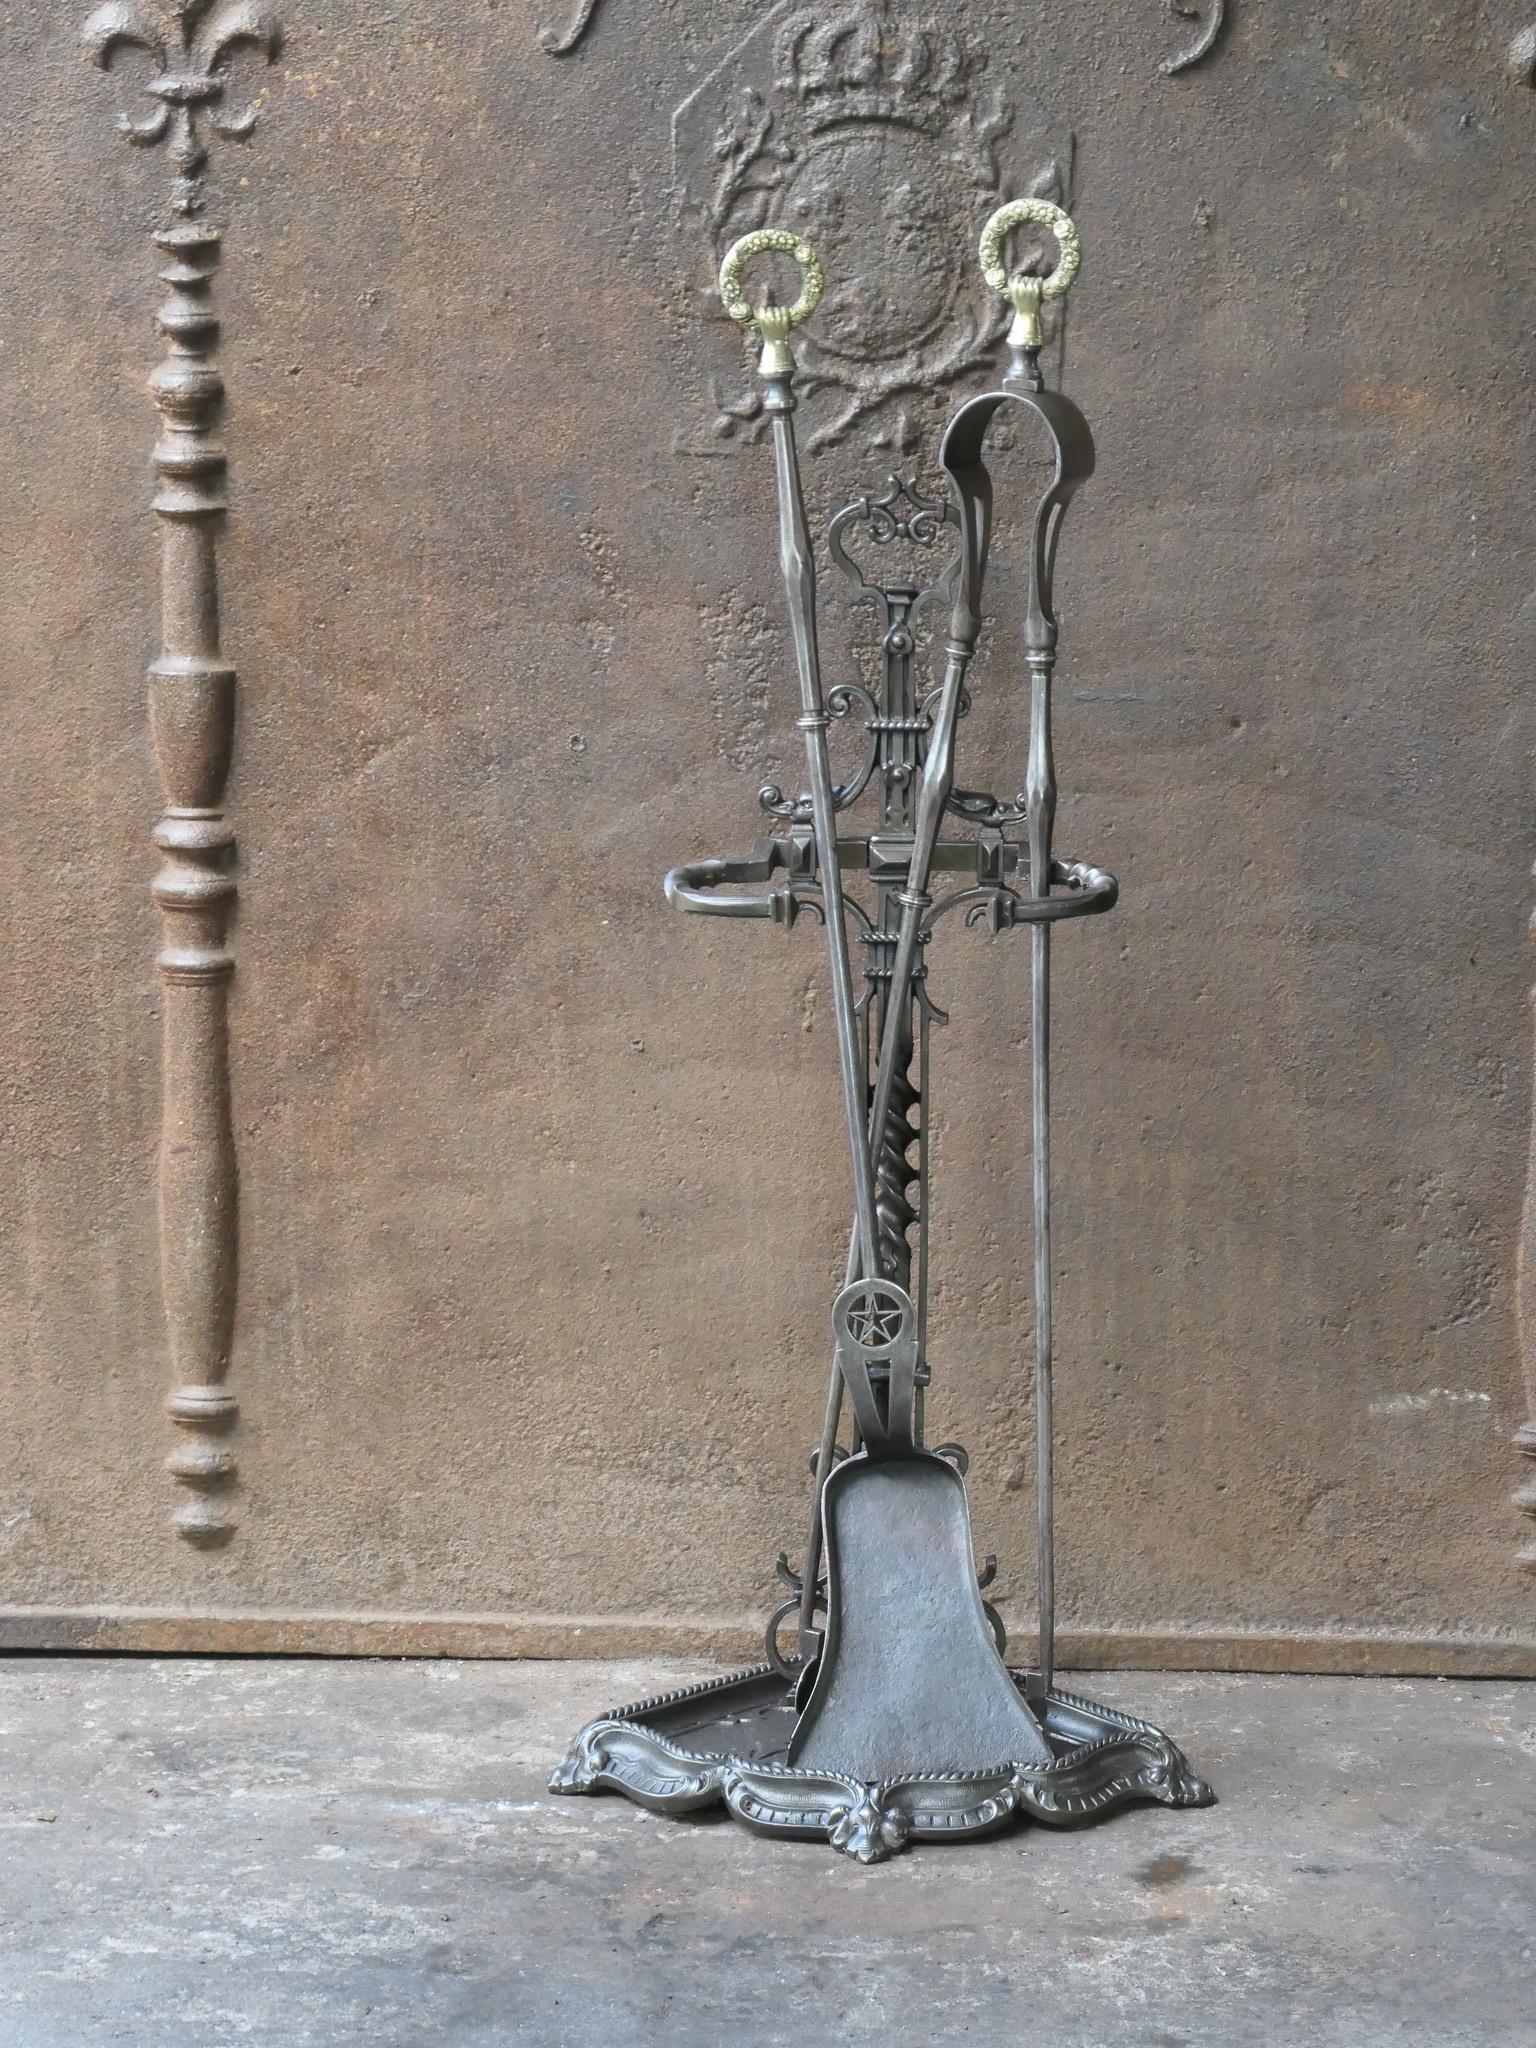 Large 19th century French Napoleon III period fireplace tool set. The tool set consists of tongs, shovel and stand. The tools and stand are made of wrought iron, cast iron and brass. The set is in a good condition and is fit for use in the fireplace.